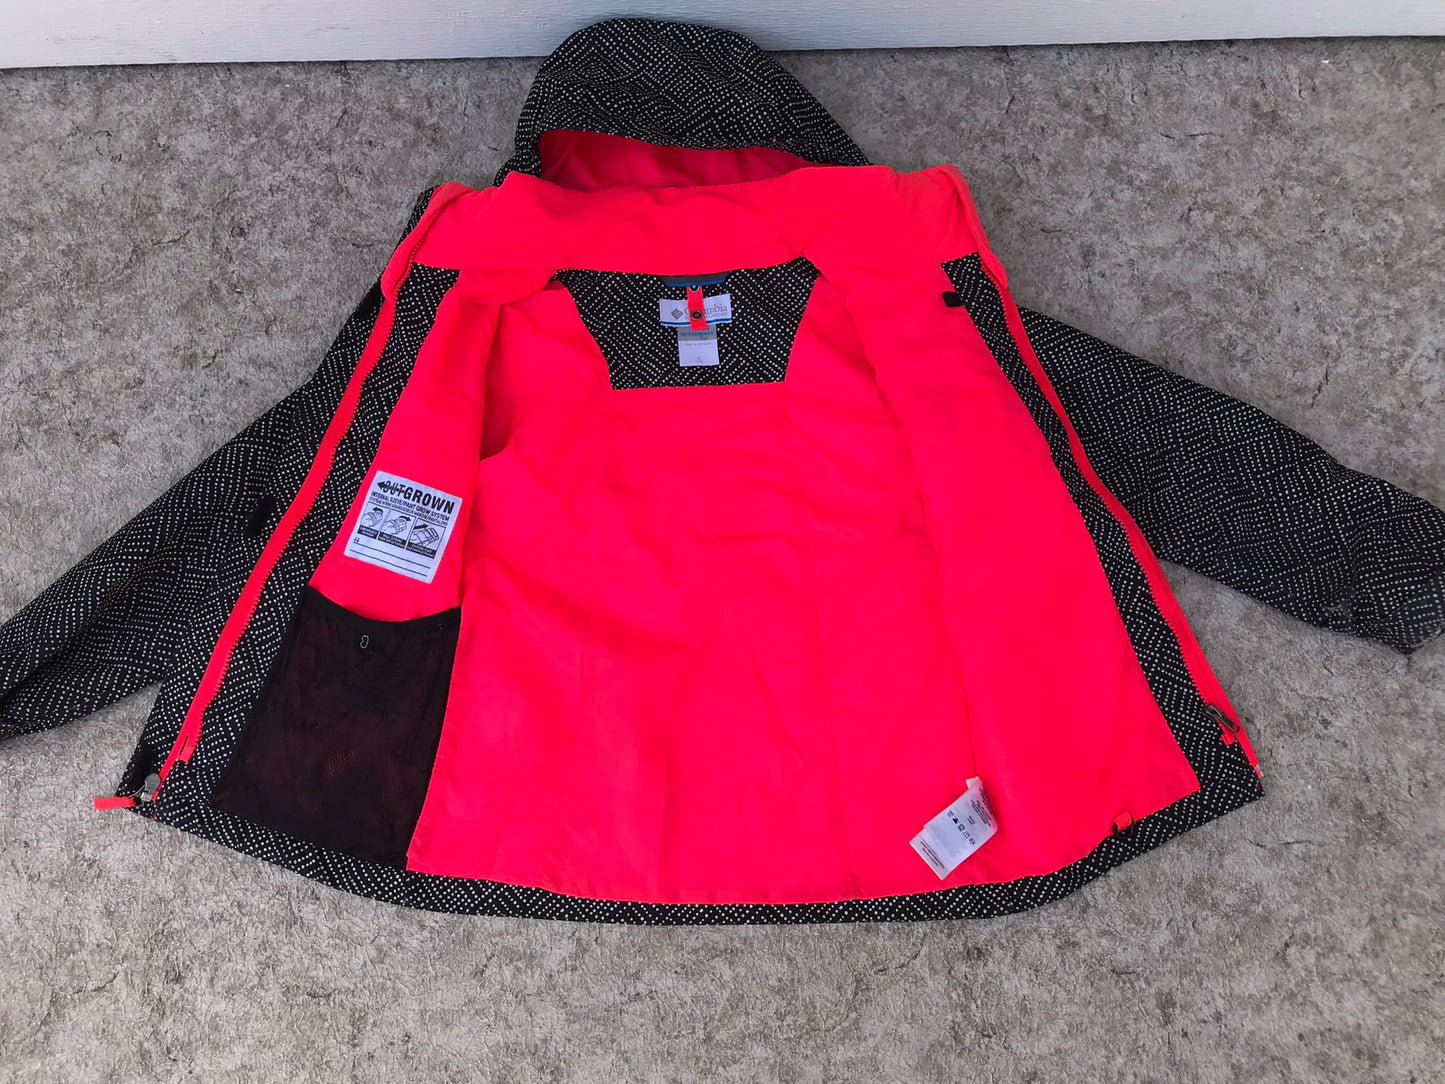 Fall Coat Child Size 7-8 Columbia Black Raspberry Excellent